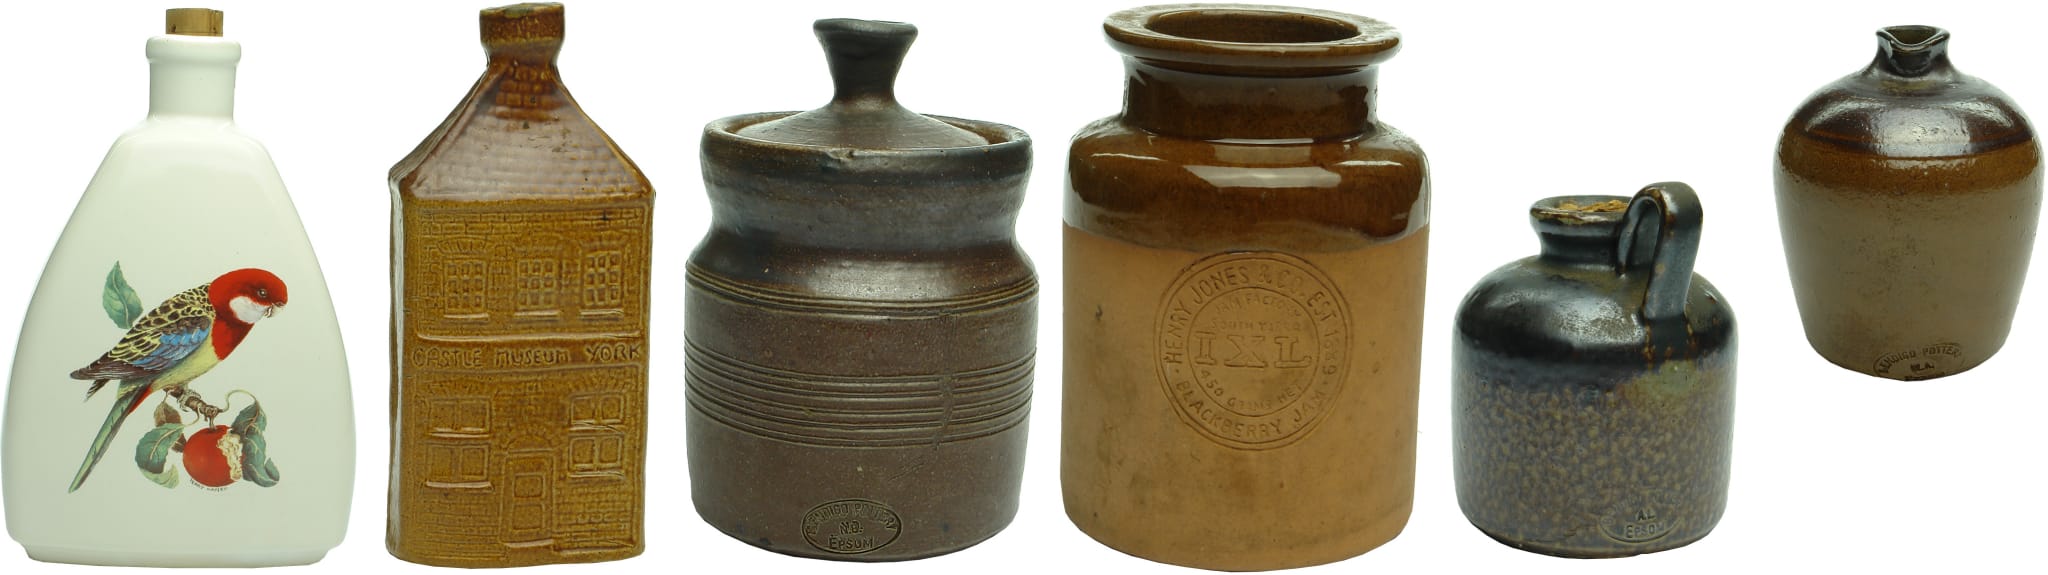 Stoneware Pottery Collection